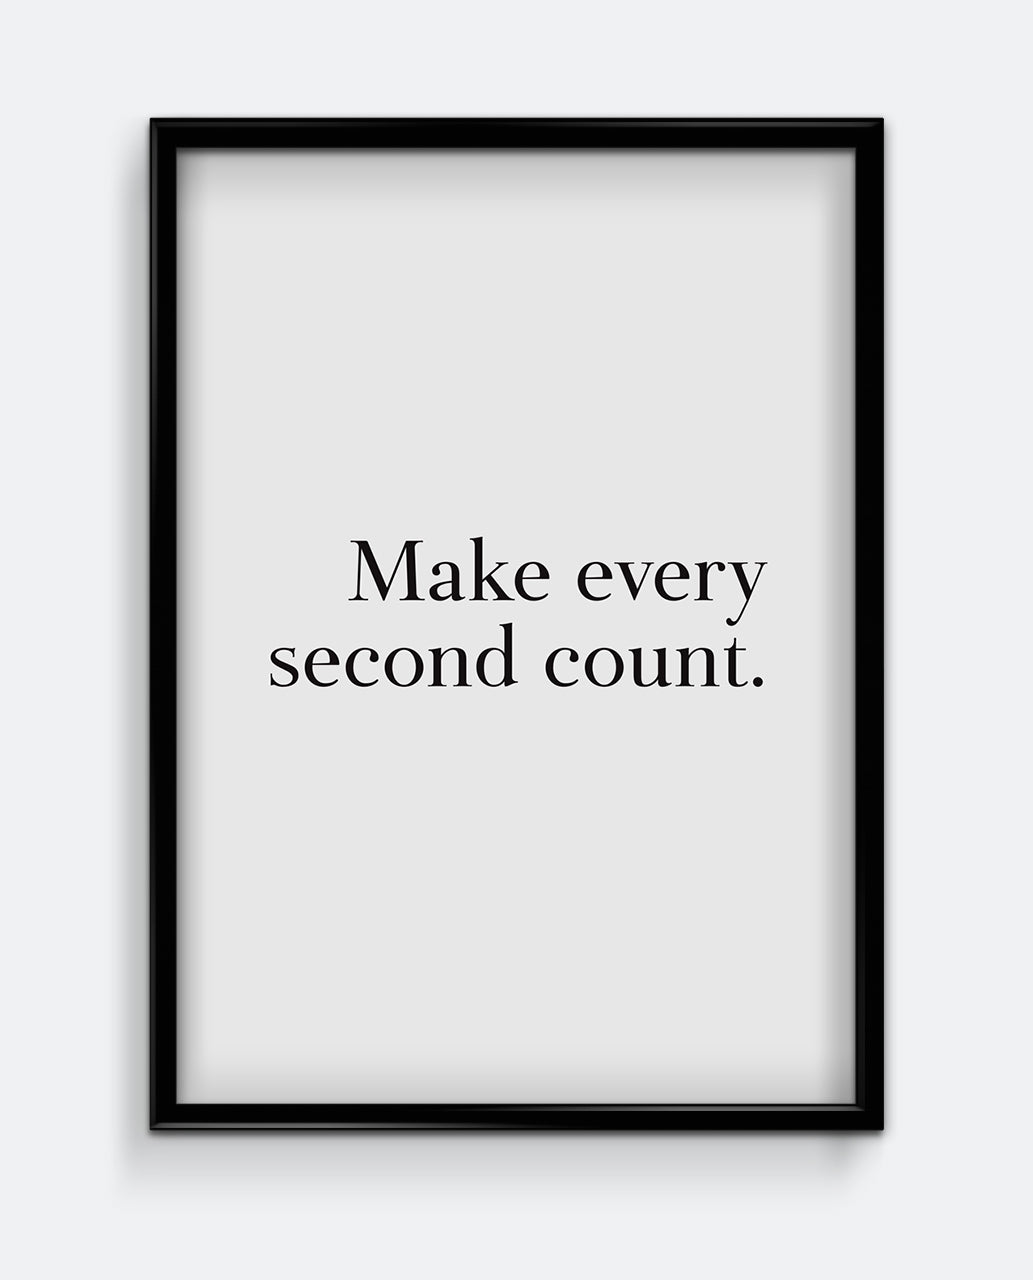 Make every second count.